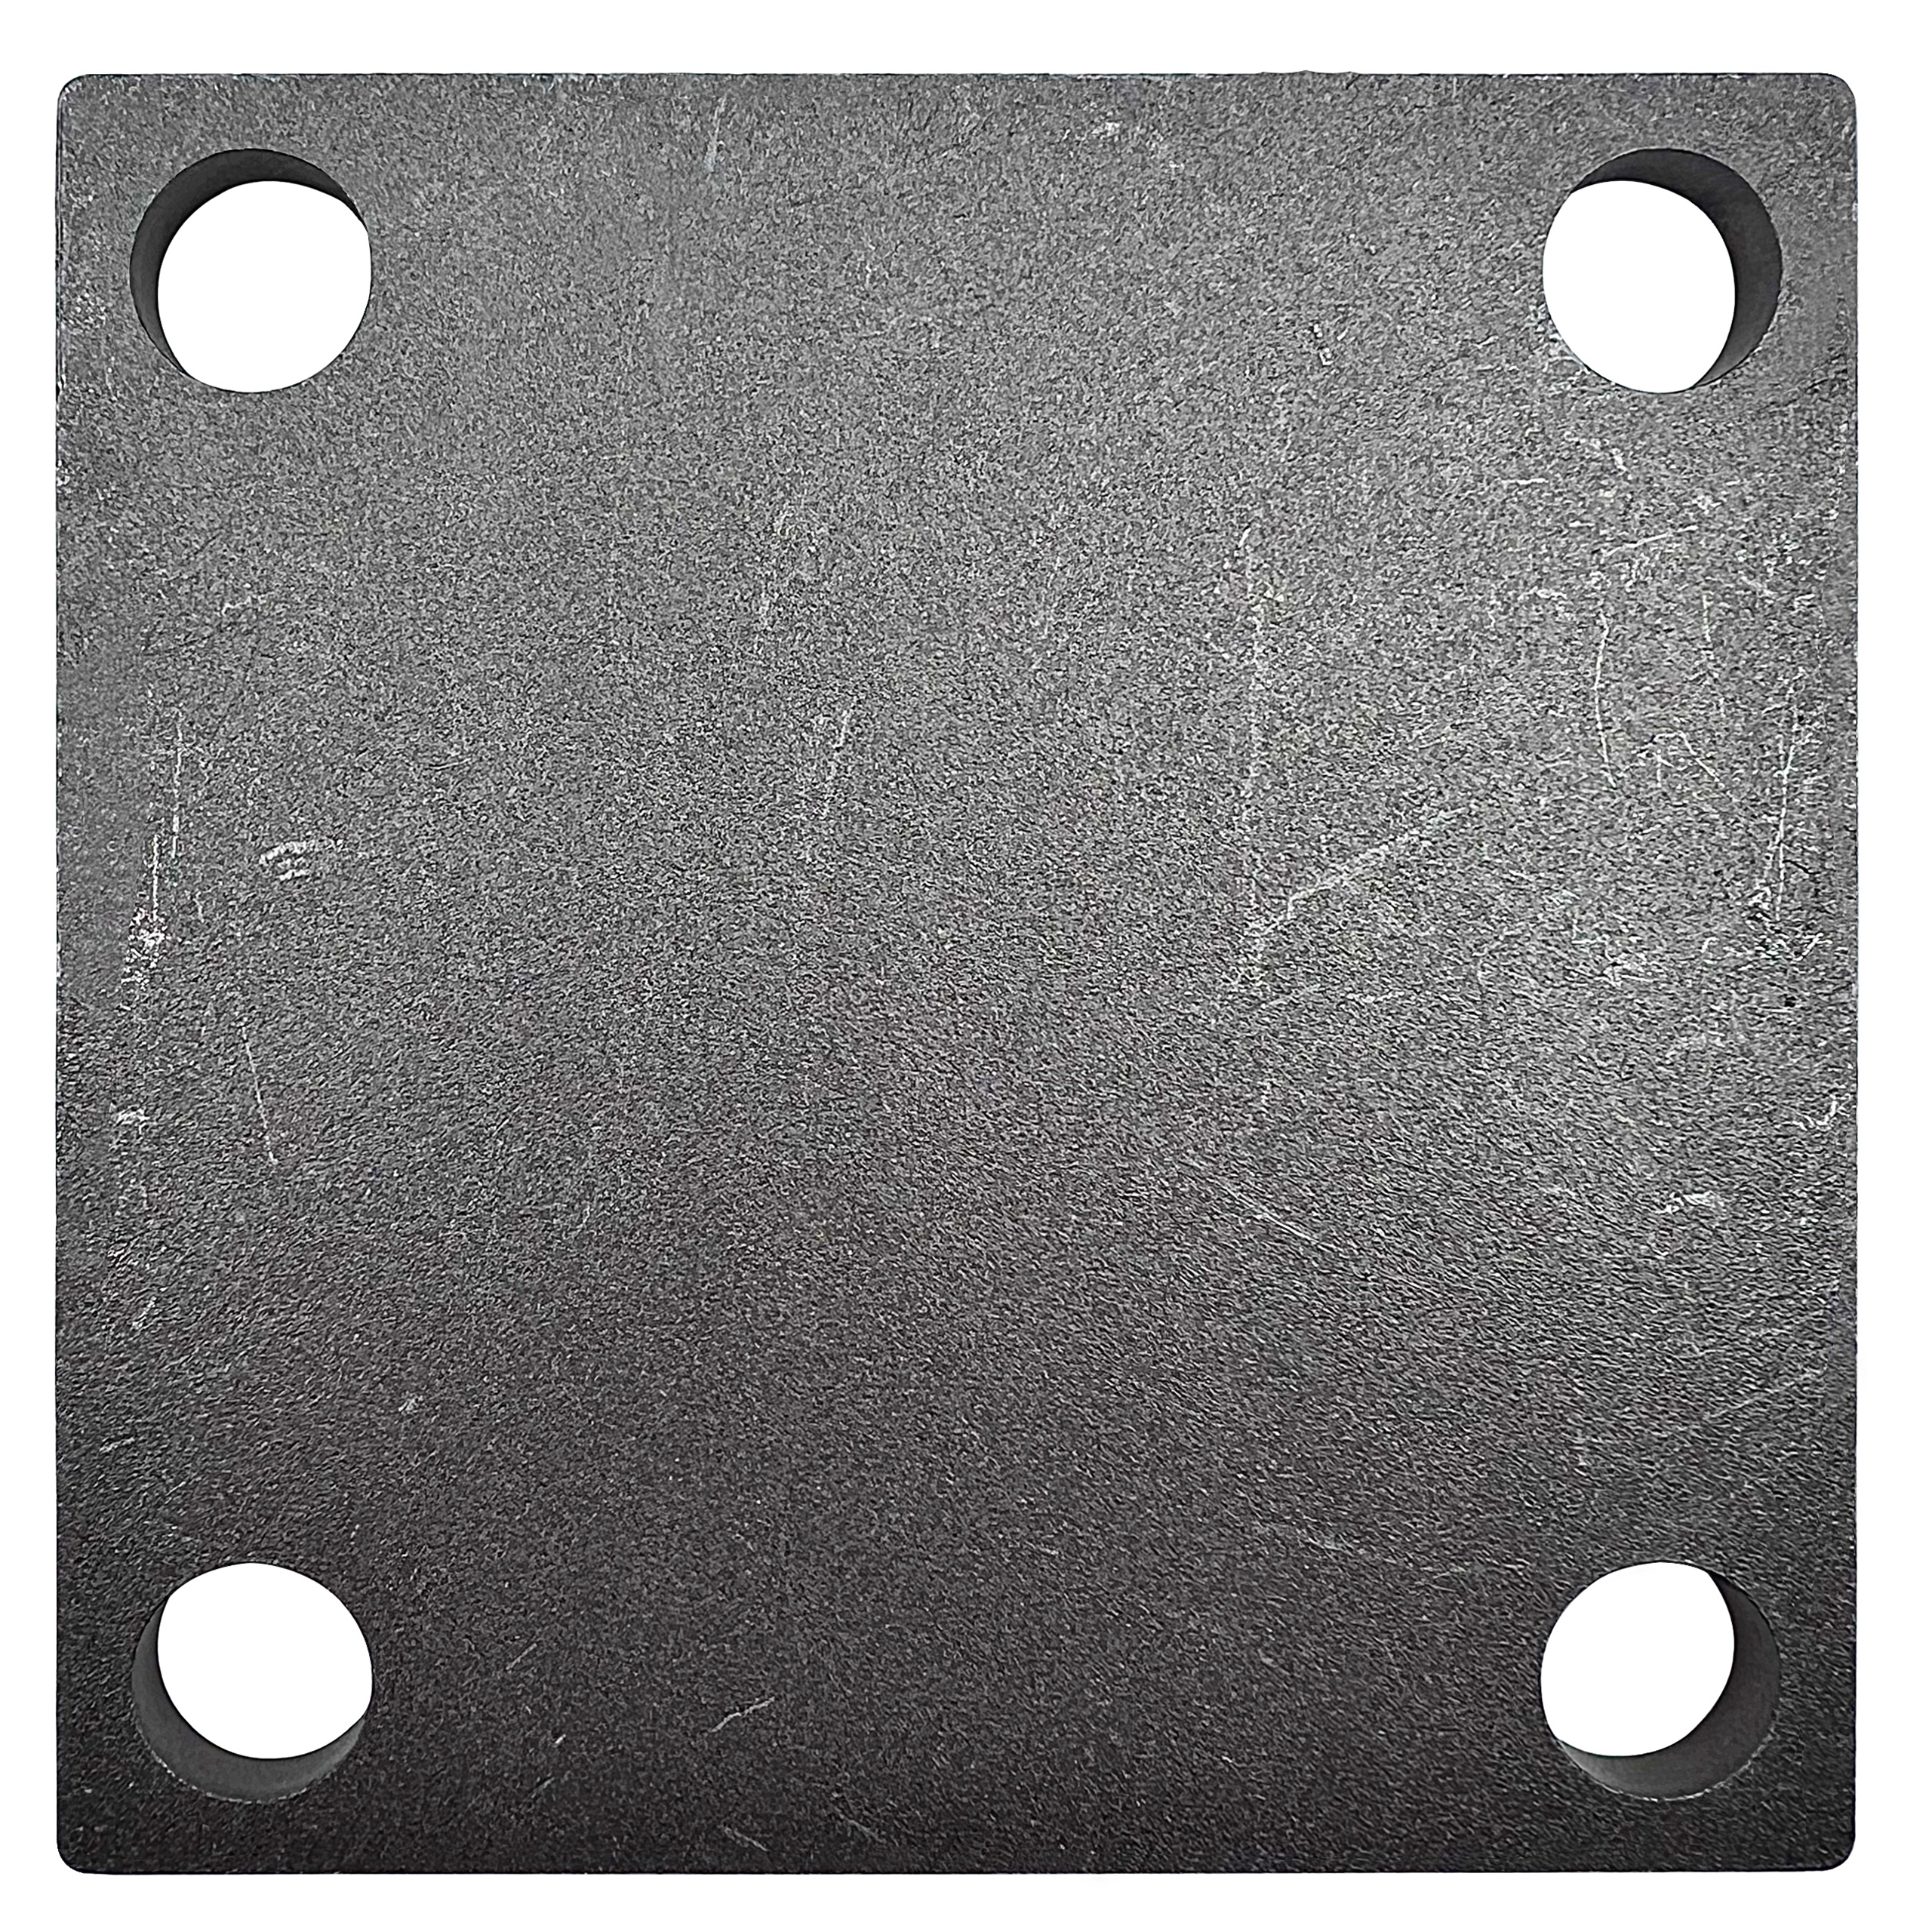 4x4" Weldable Square Steel Metal Baseplate 3/16" Thick 4.5mm - Laser Cut – A36 Heavy Duty Carbon Steel